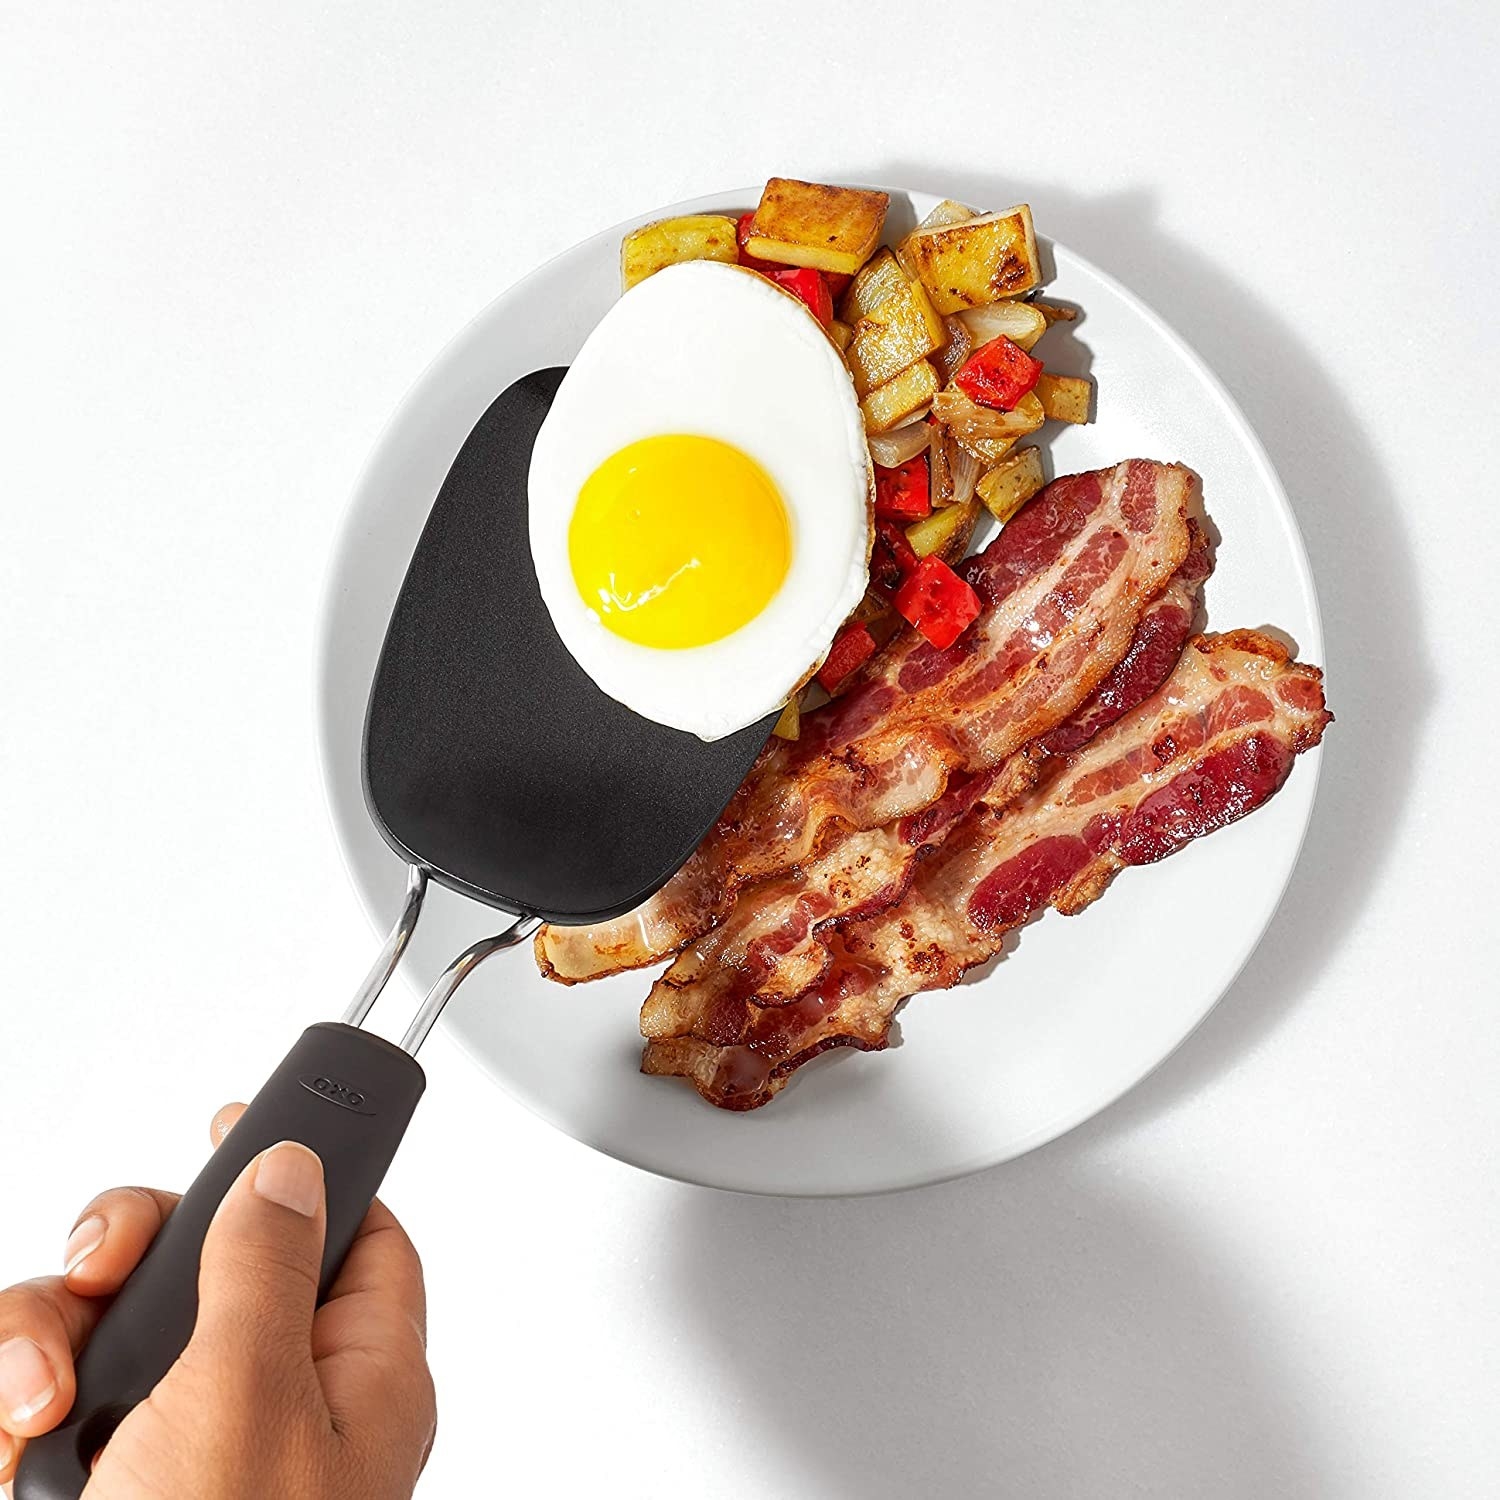 Someone using the flipper to slide a sunny-side up egg onto a plate full of breakfast food